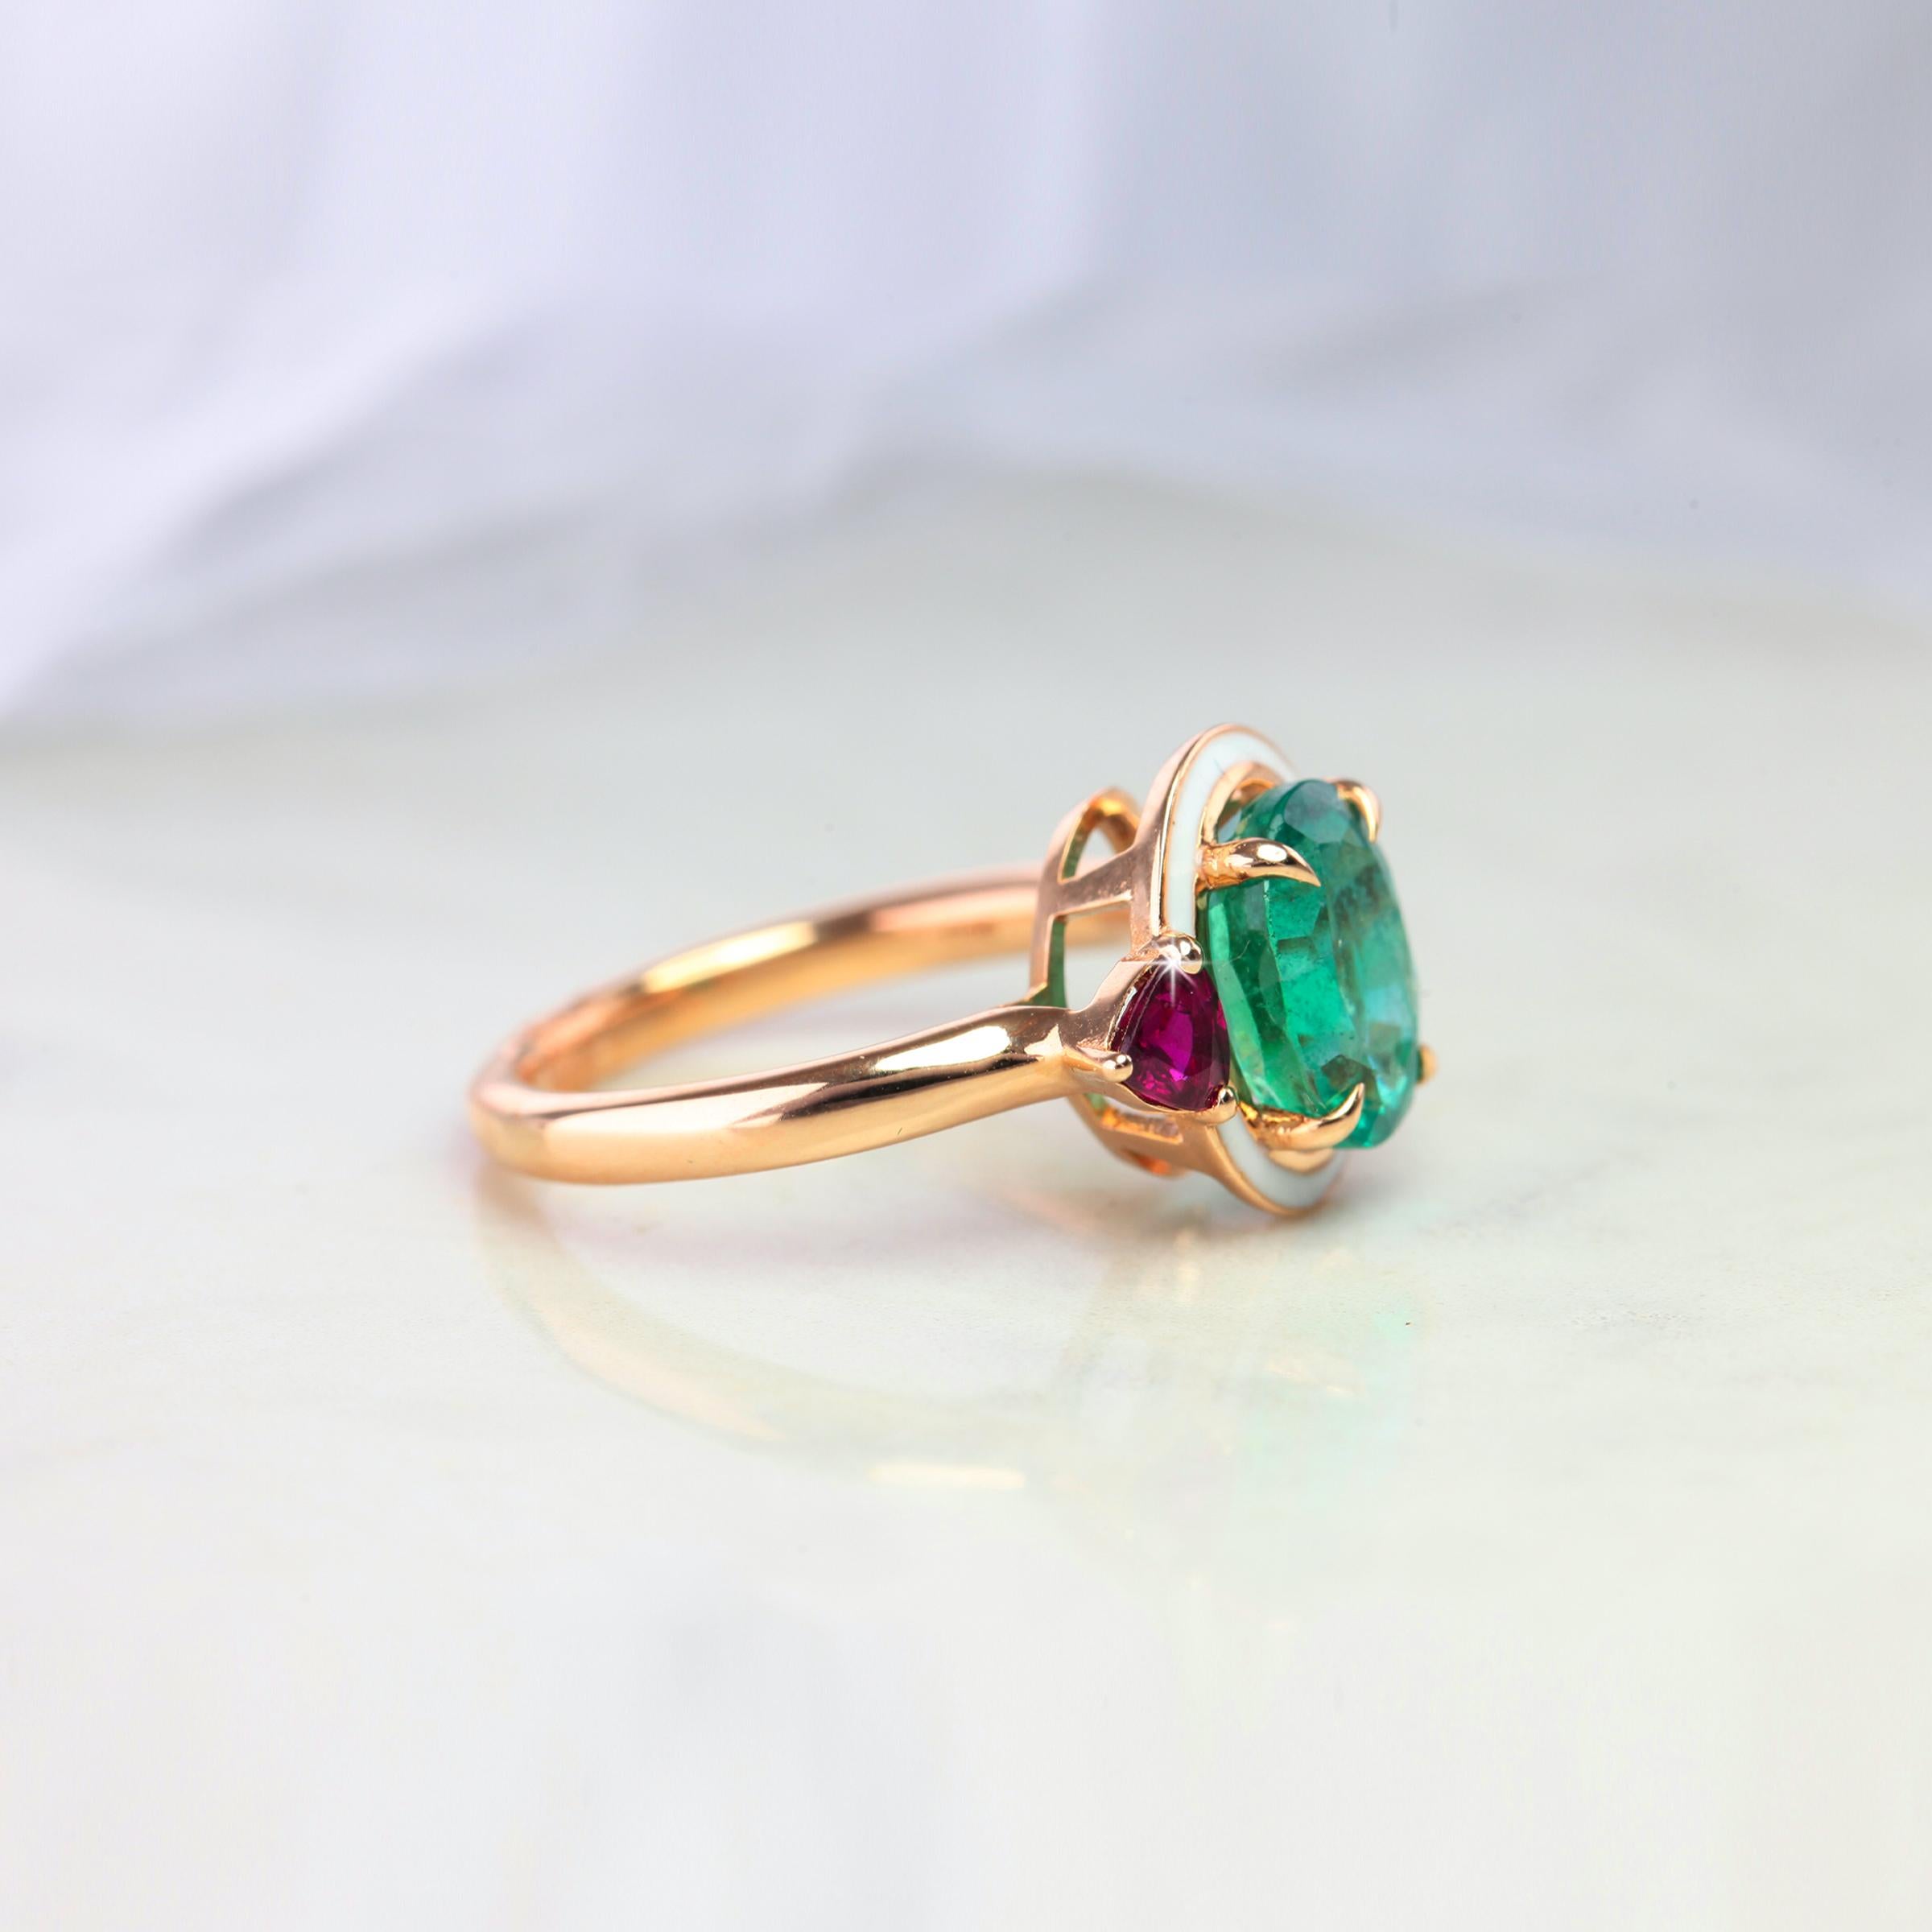 Artdeco Style Emerald Ring, Artdeco Style Oval Emerald And Ruby With White Enameled Statement Ring, Engagement Ring, Statement Ring created by hands with great honour.
I used brillant ruby to reveal emerald stone. I completed these in 14K solid